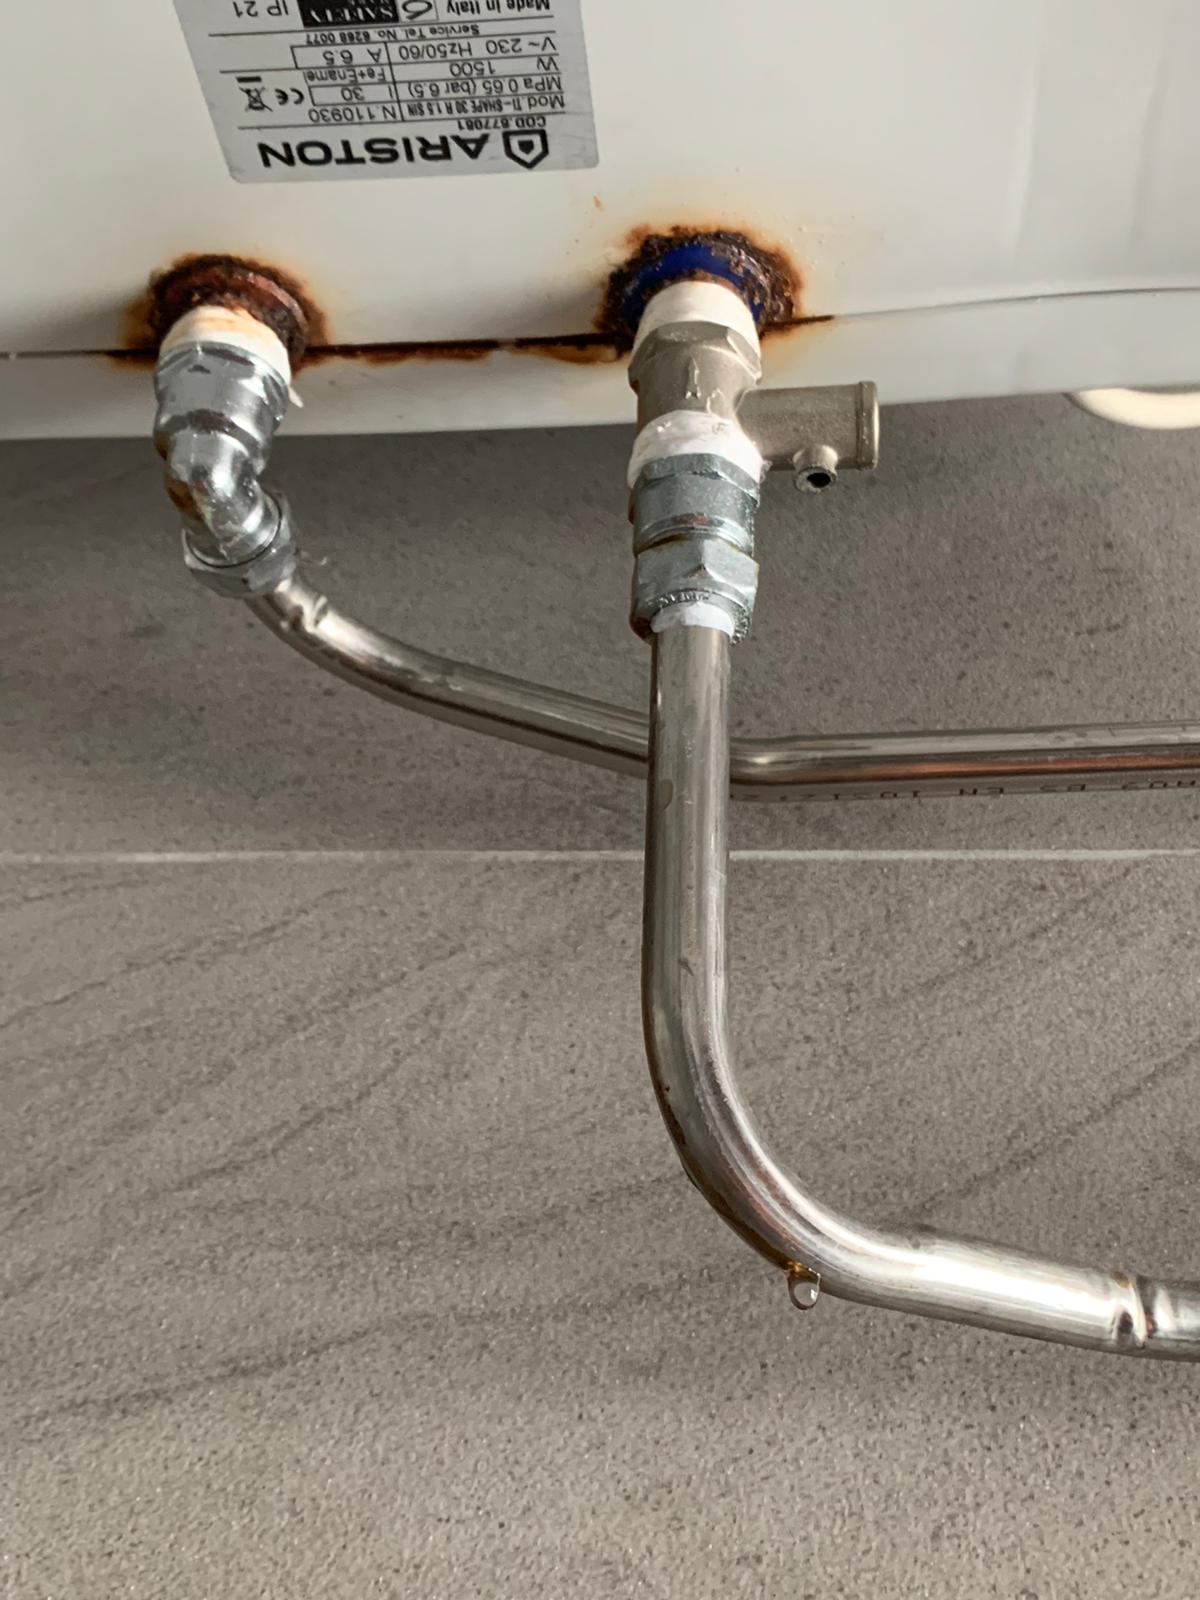 rusty-water-leaking-from-instant-water-heater